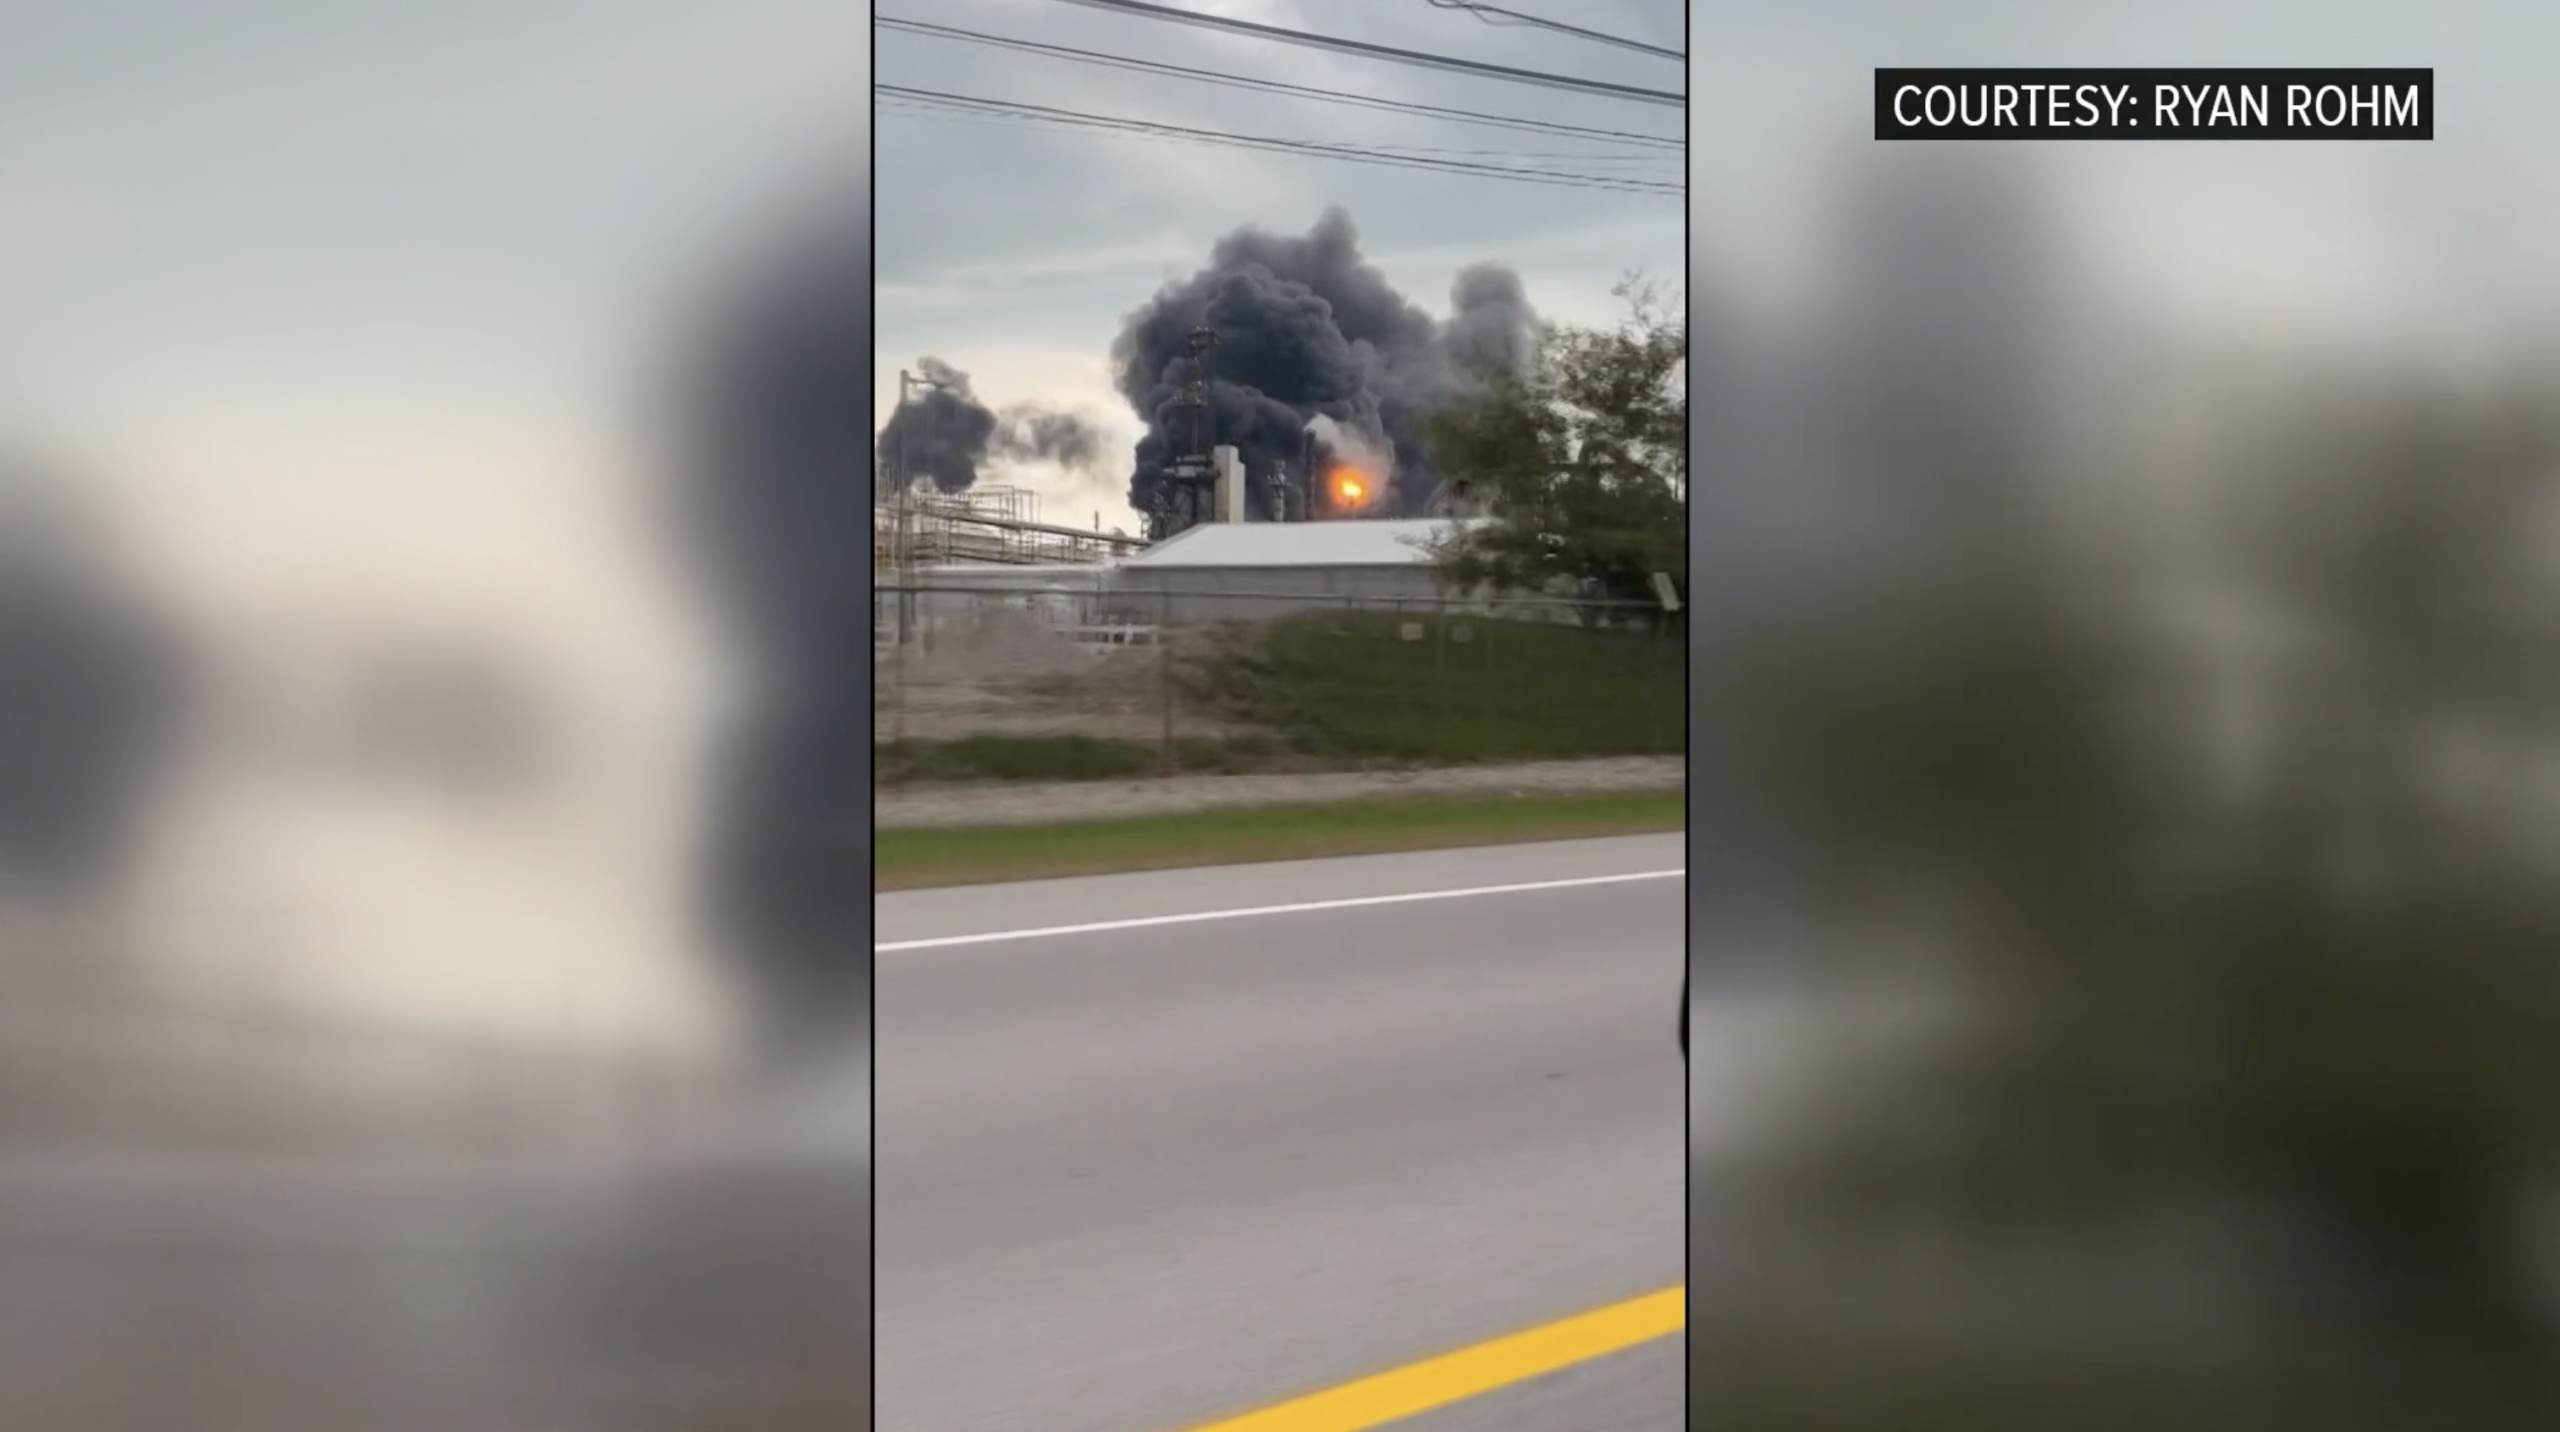 ANOTHER BP FIRE: Ohio Firefighters Respond to a Fire at the BP Refinery; Injuries Reported (VIDEO)